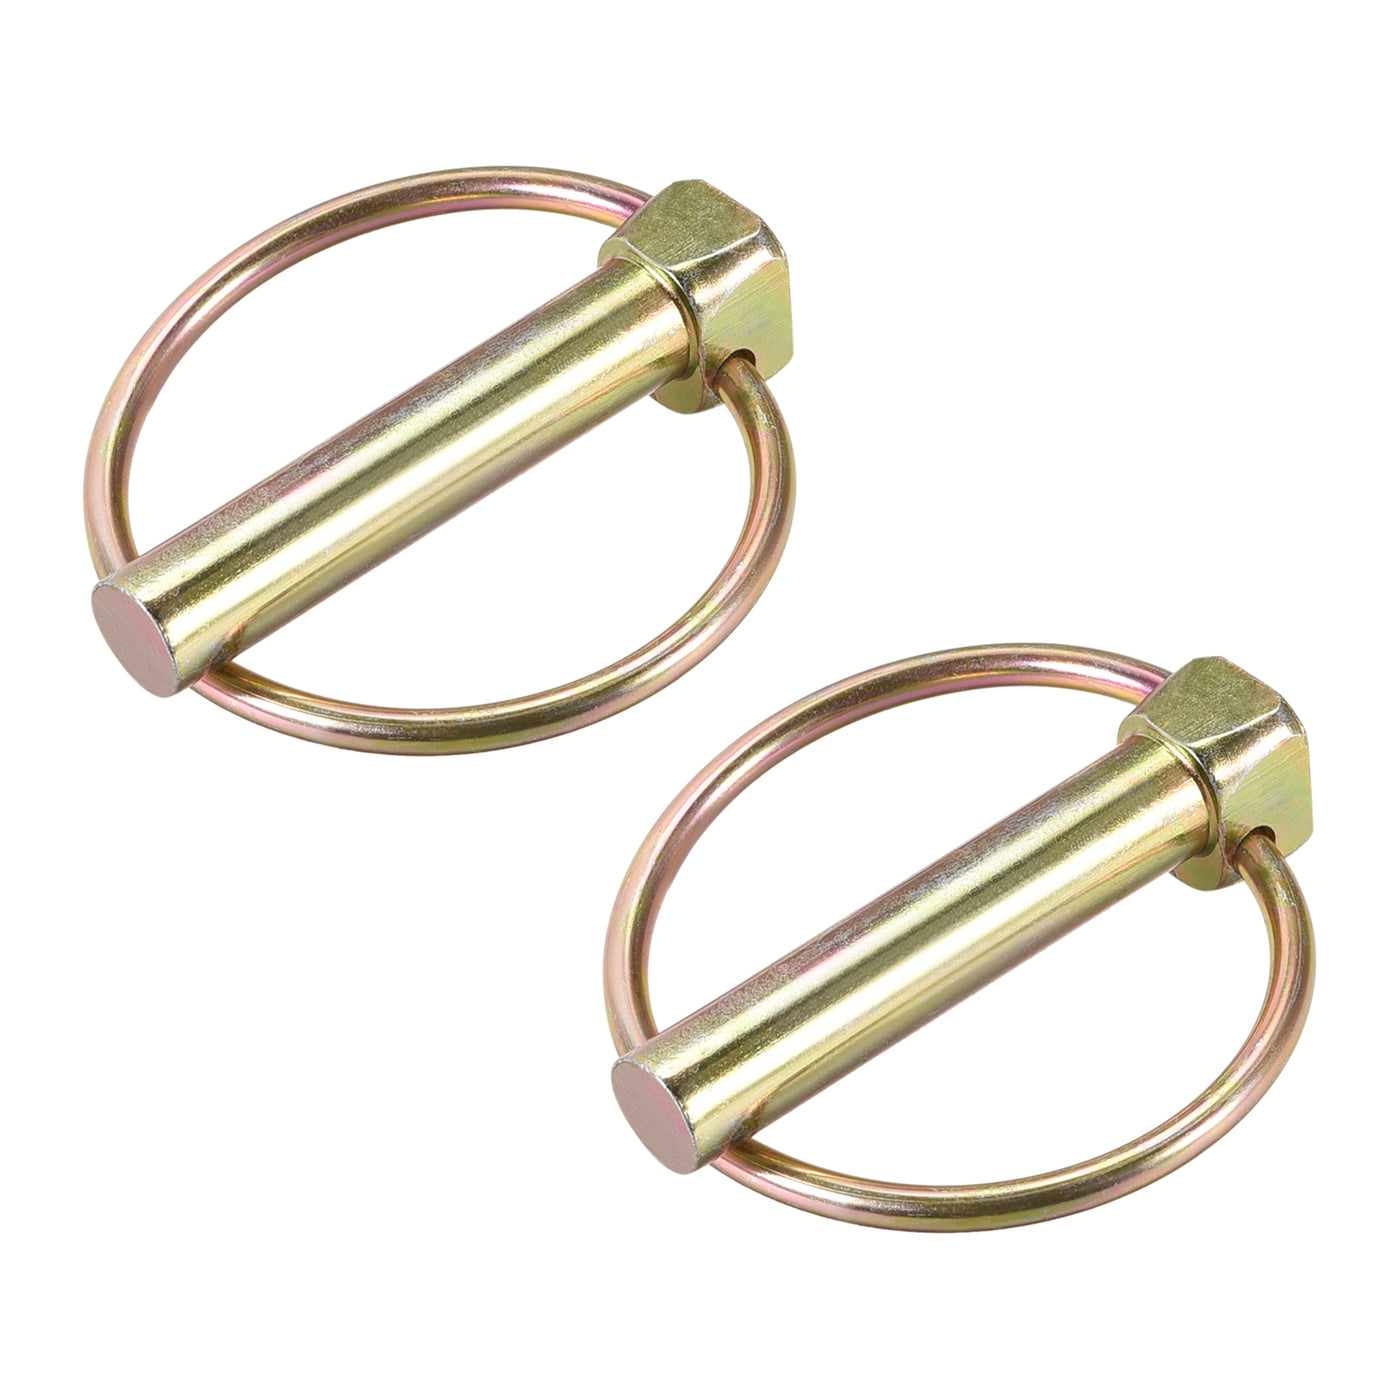 uxcell Uxcell 2Pcs 5/16" x 2-3/4" Linch Pin with Ring for Boat Kayak Canoe